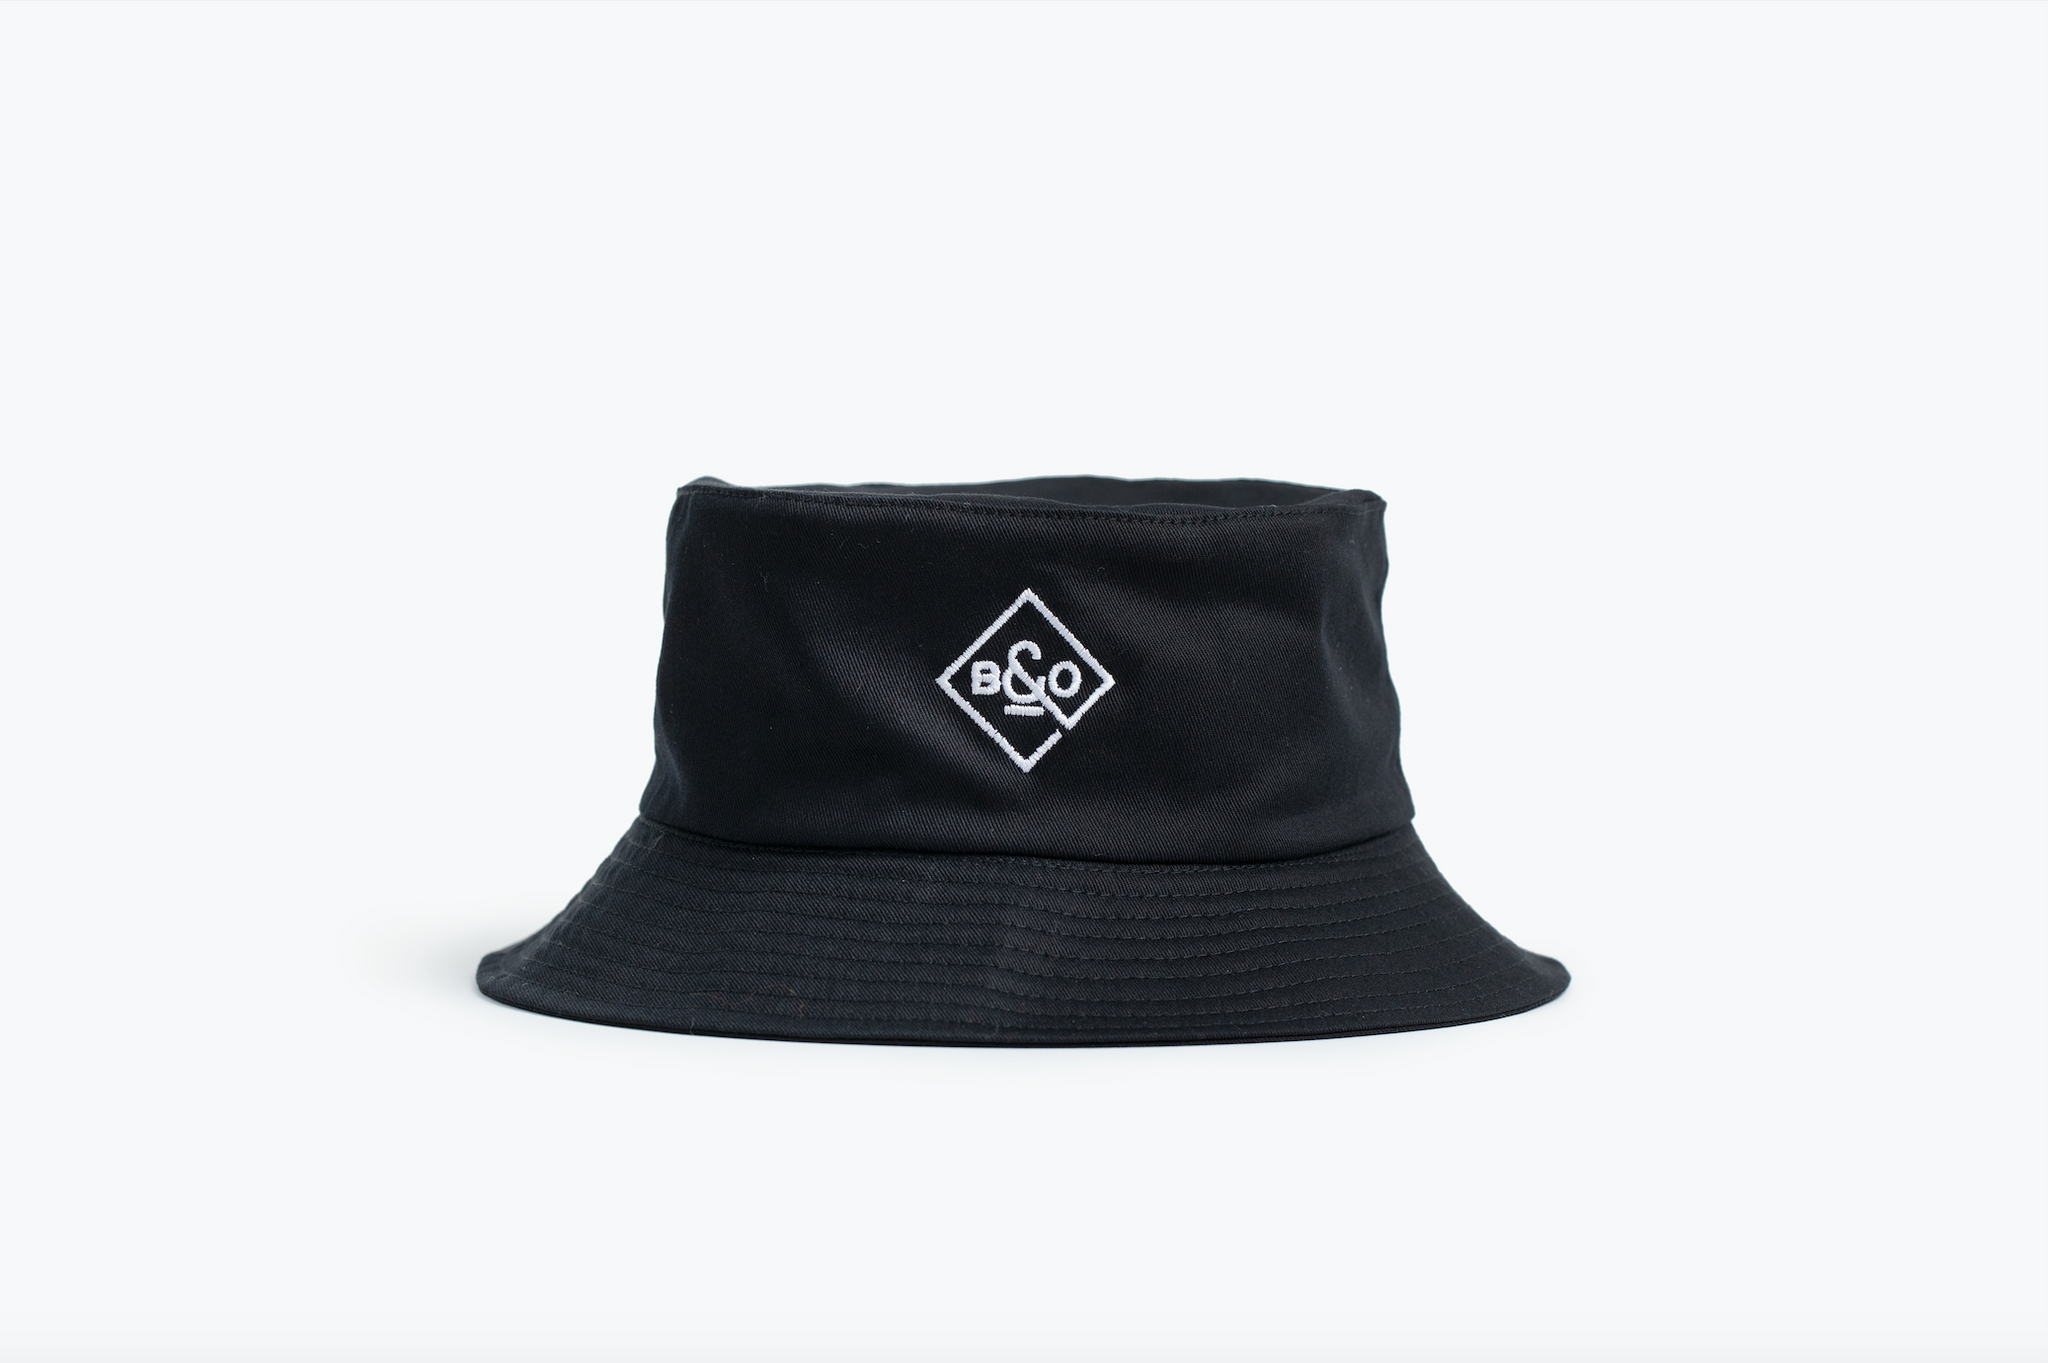 Up-Cycled Bucket Hat